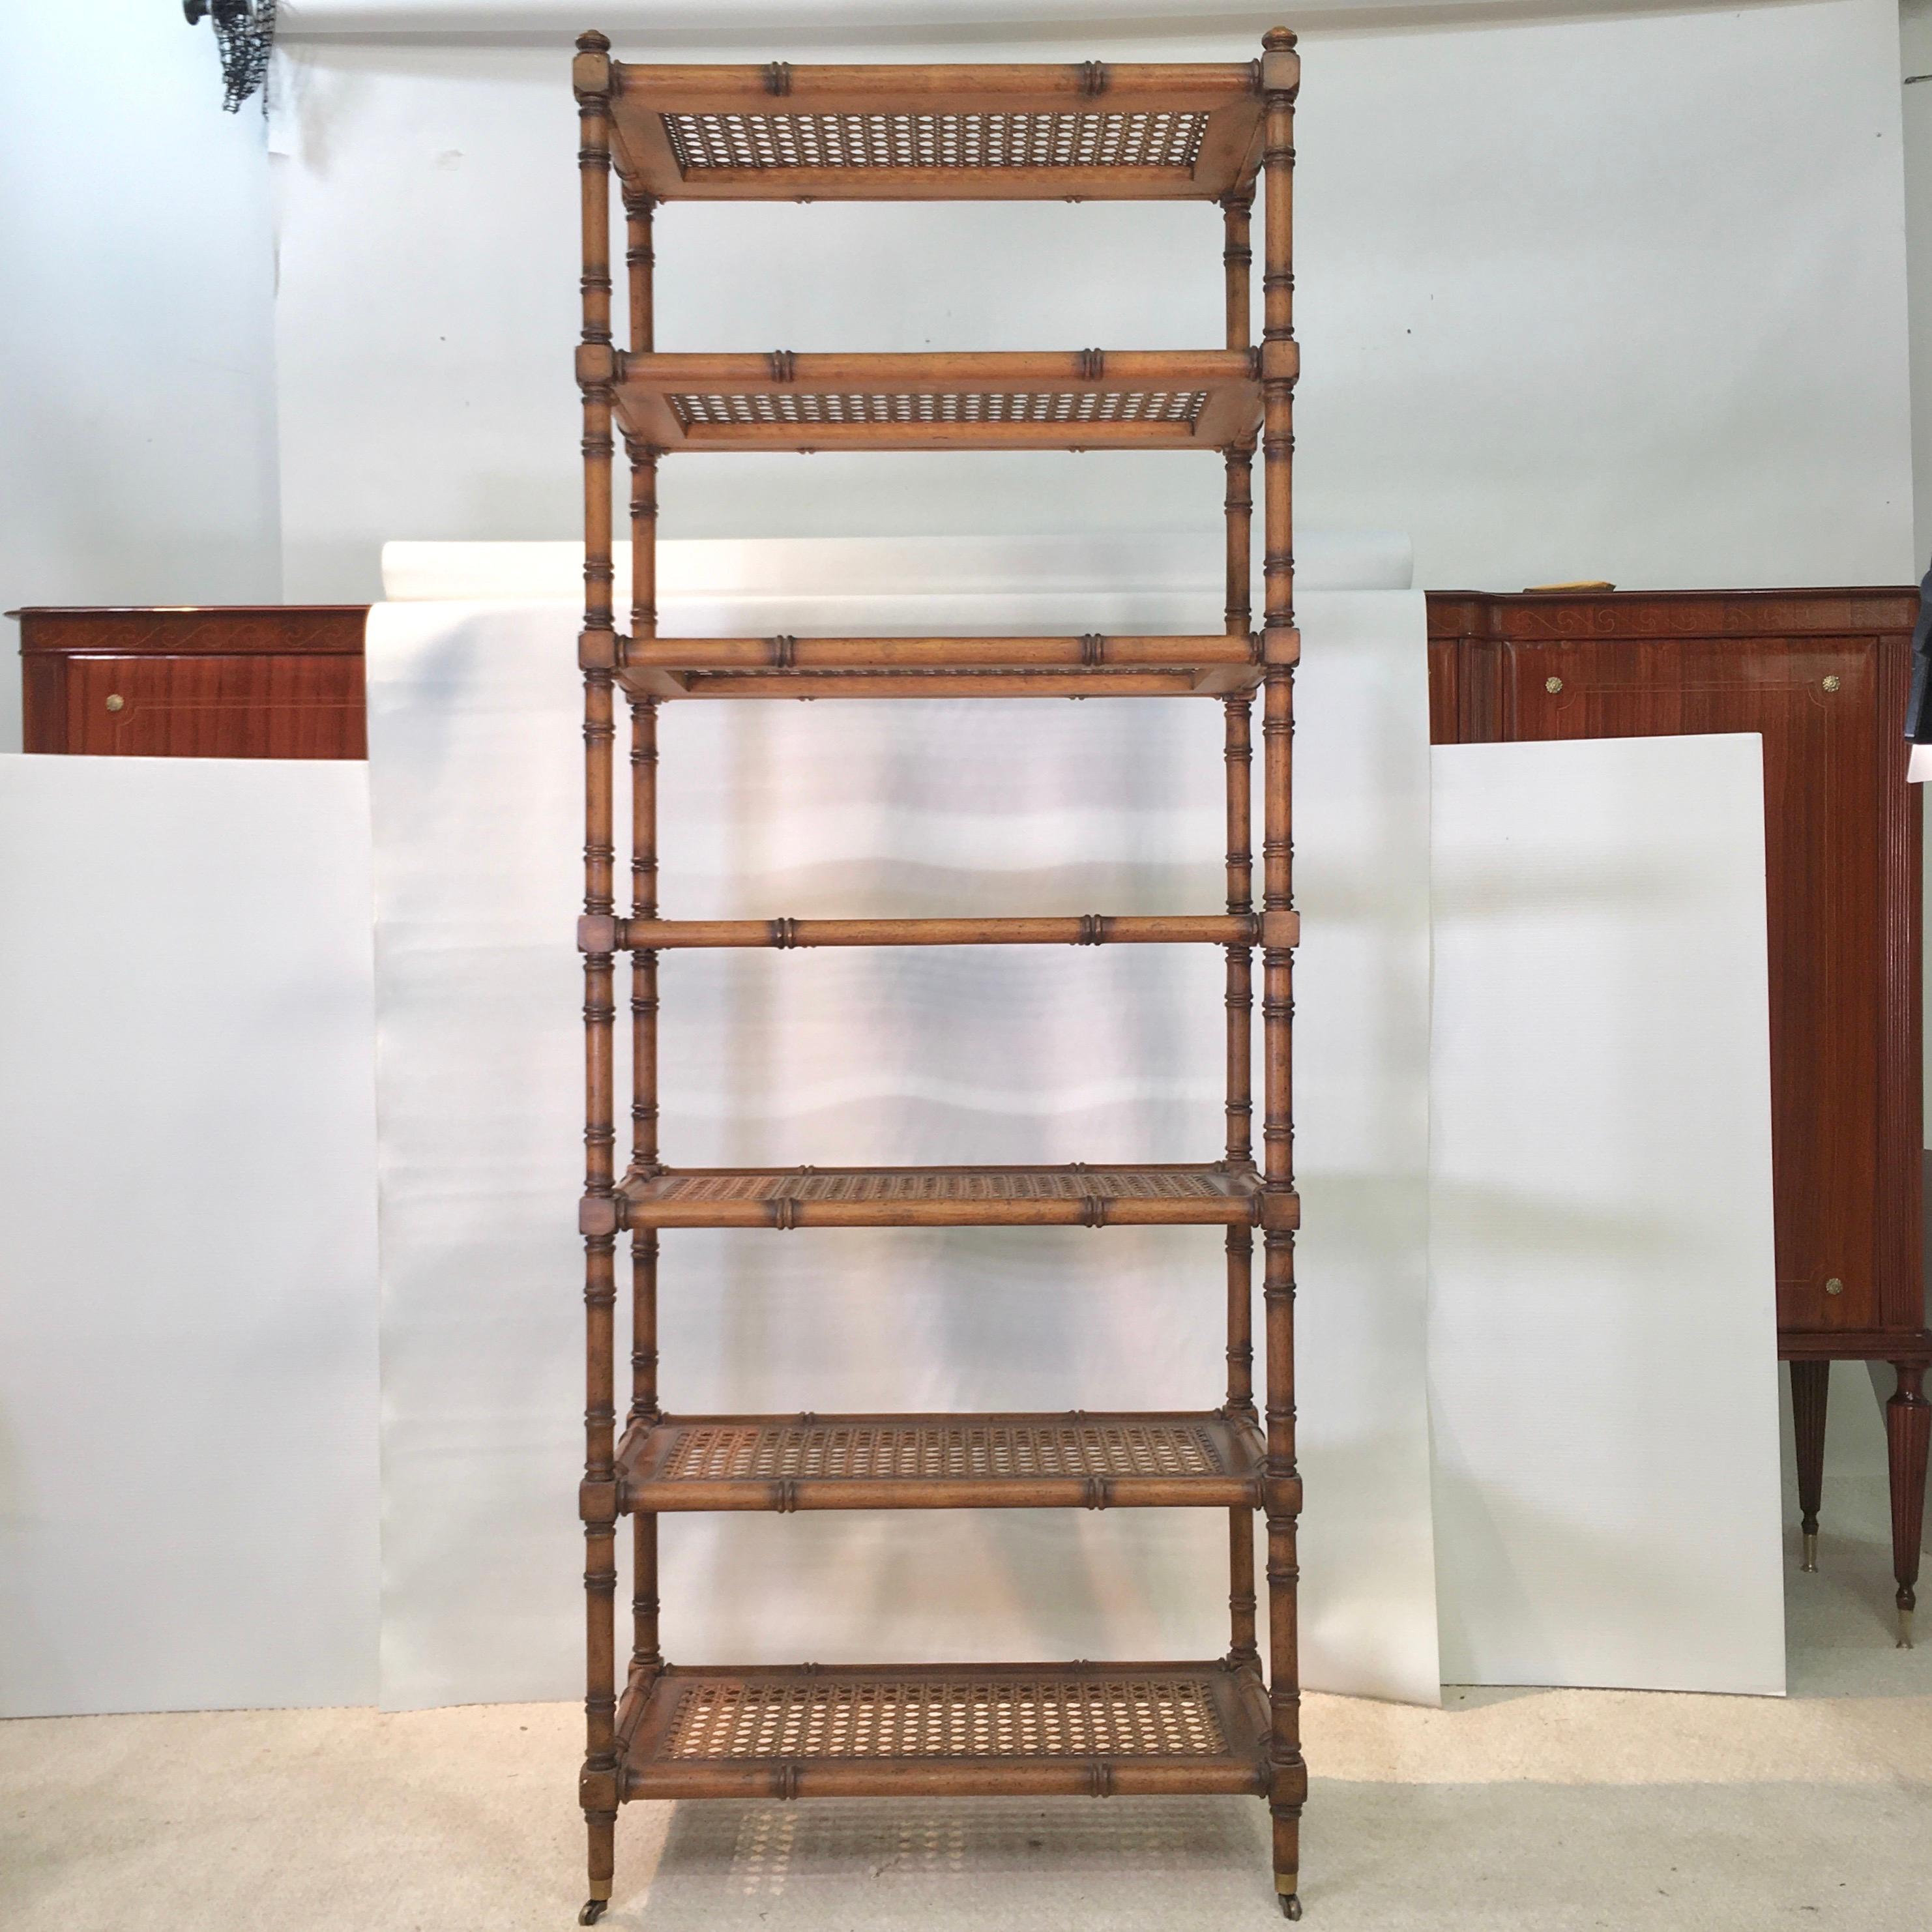 Hollywood Regency cum George IV-style étagère in faux bamboo wood in a provincial pecan finish and having seven caned open shelves, raised on four legs with brass casters. Finished on all sides so as to float freestanding within a room.